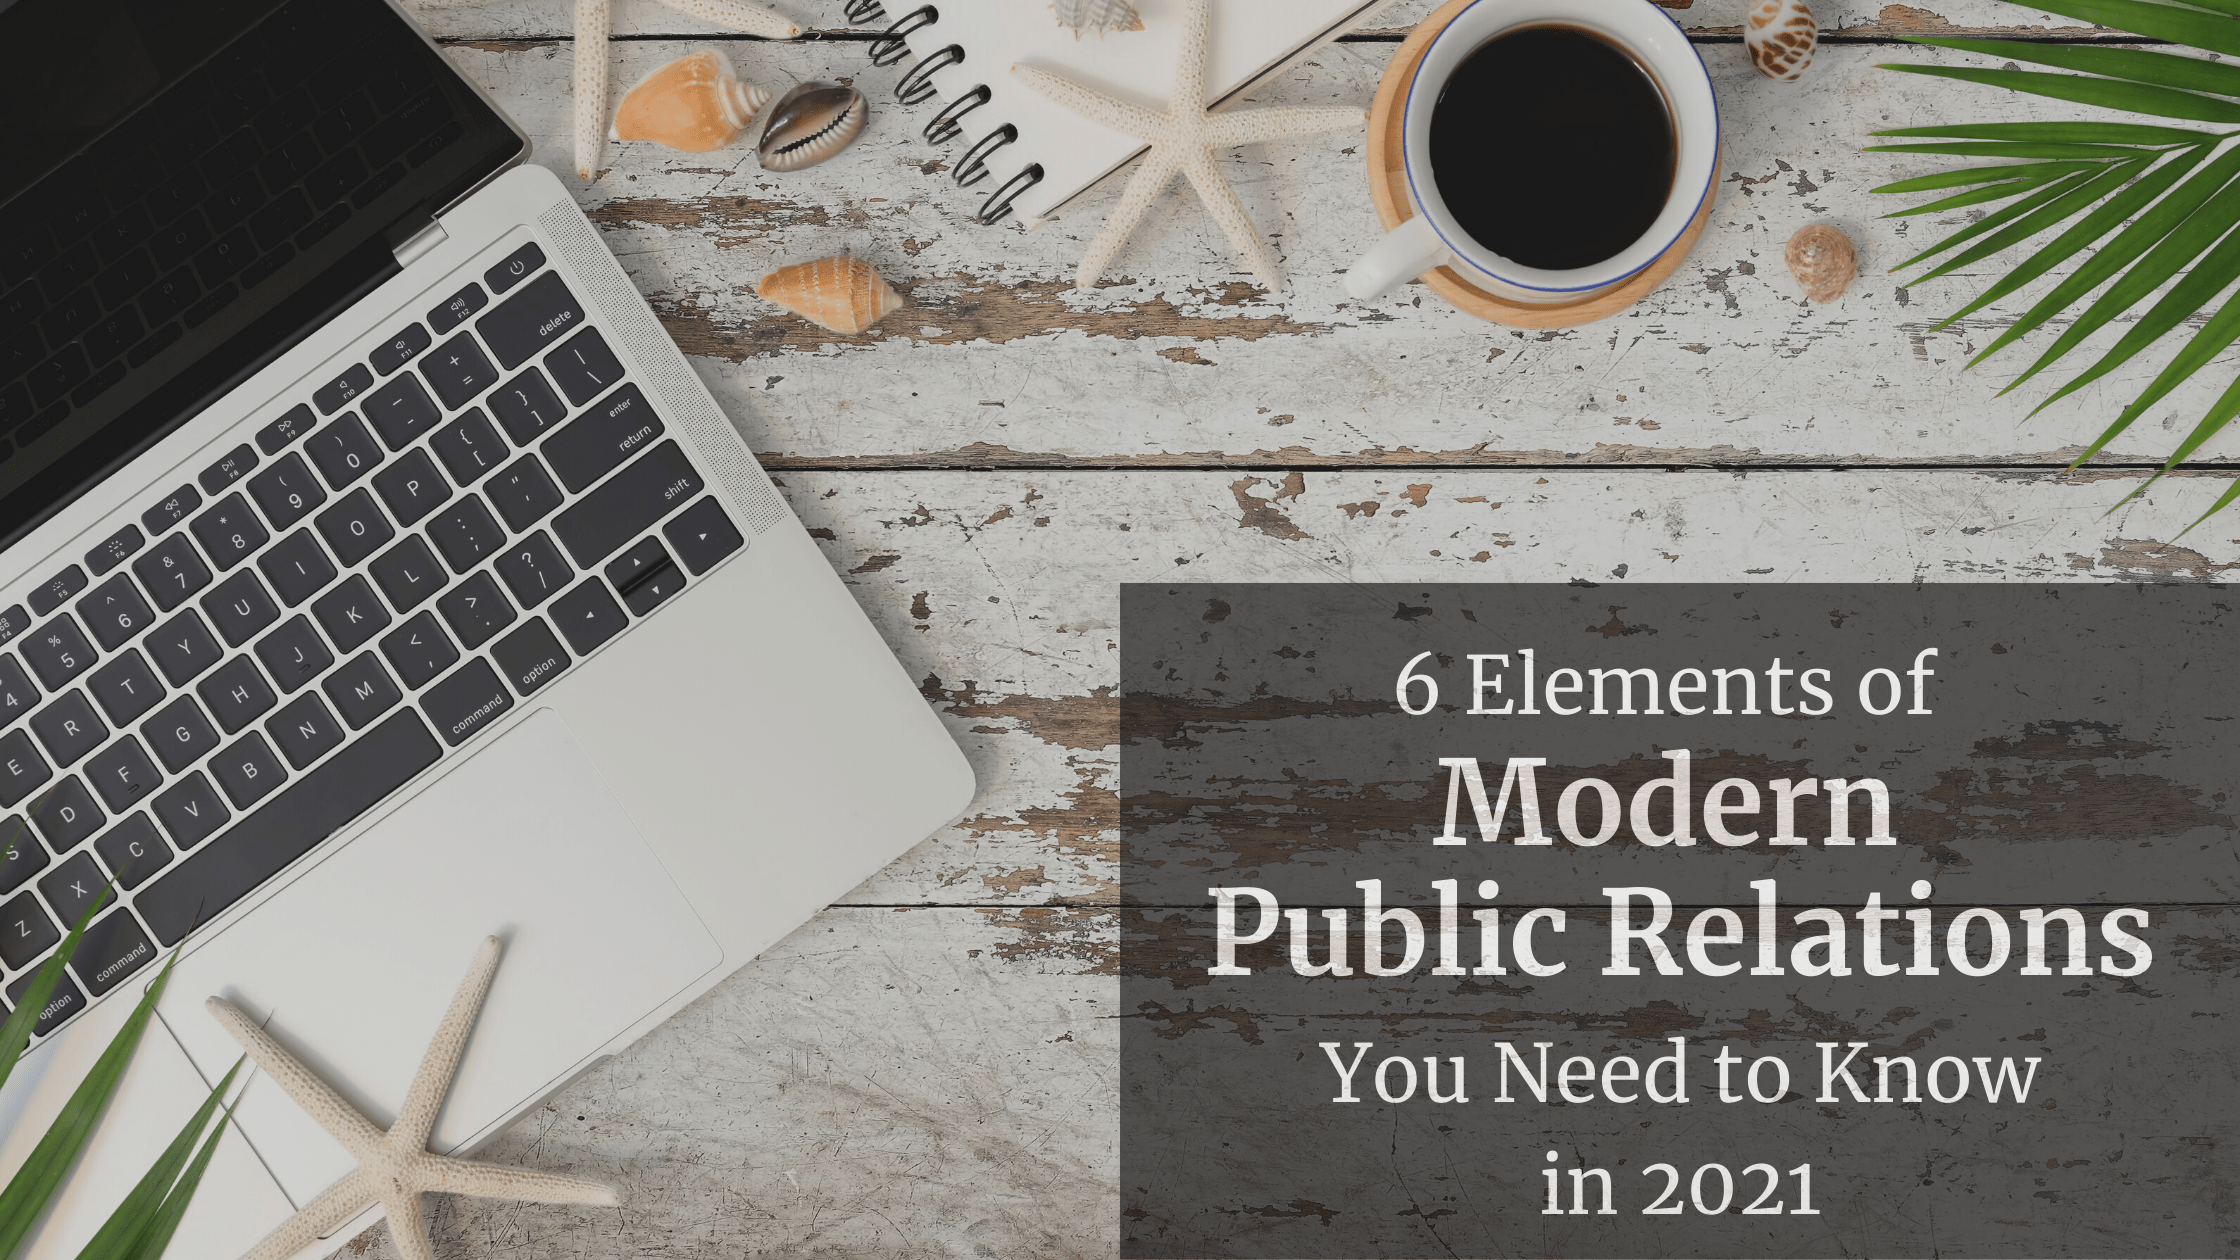 6 Elements of Modern Public Relations